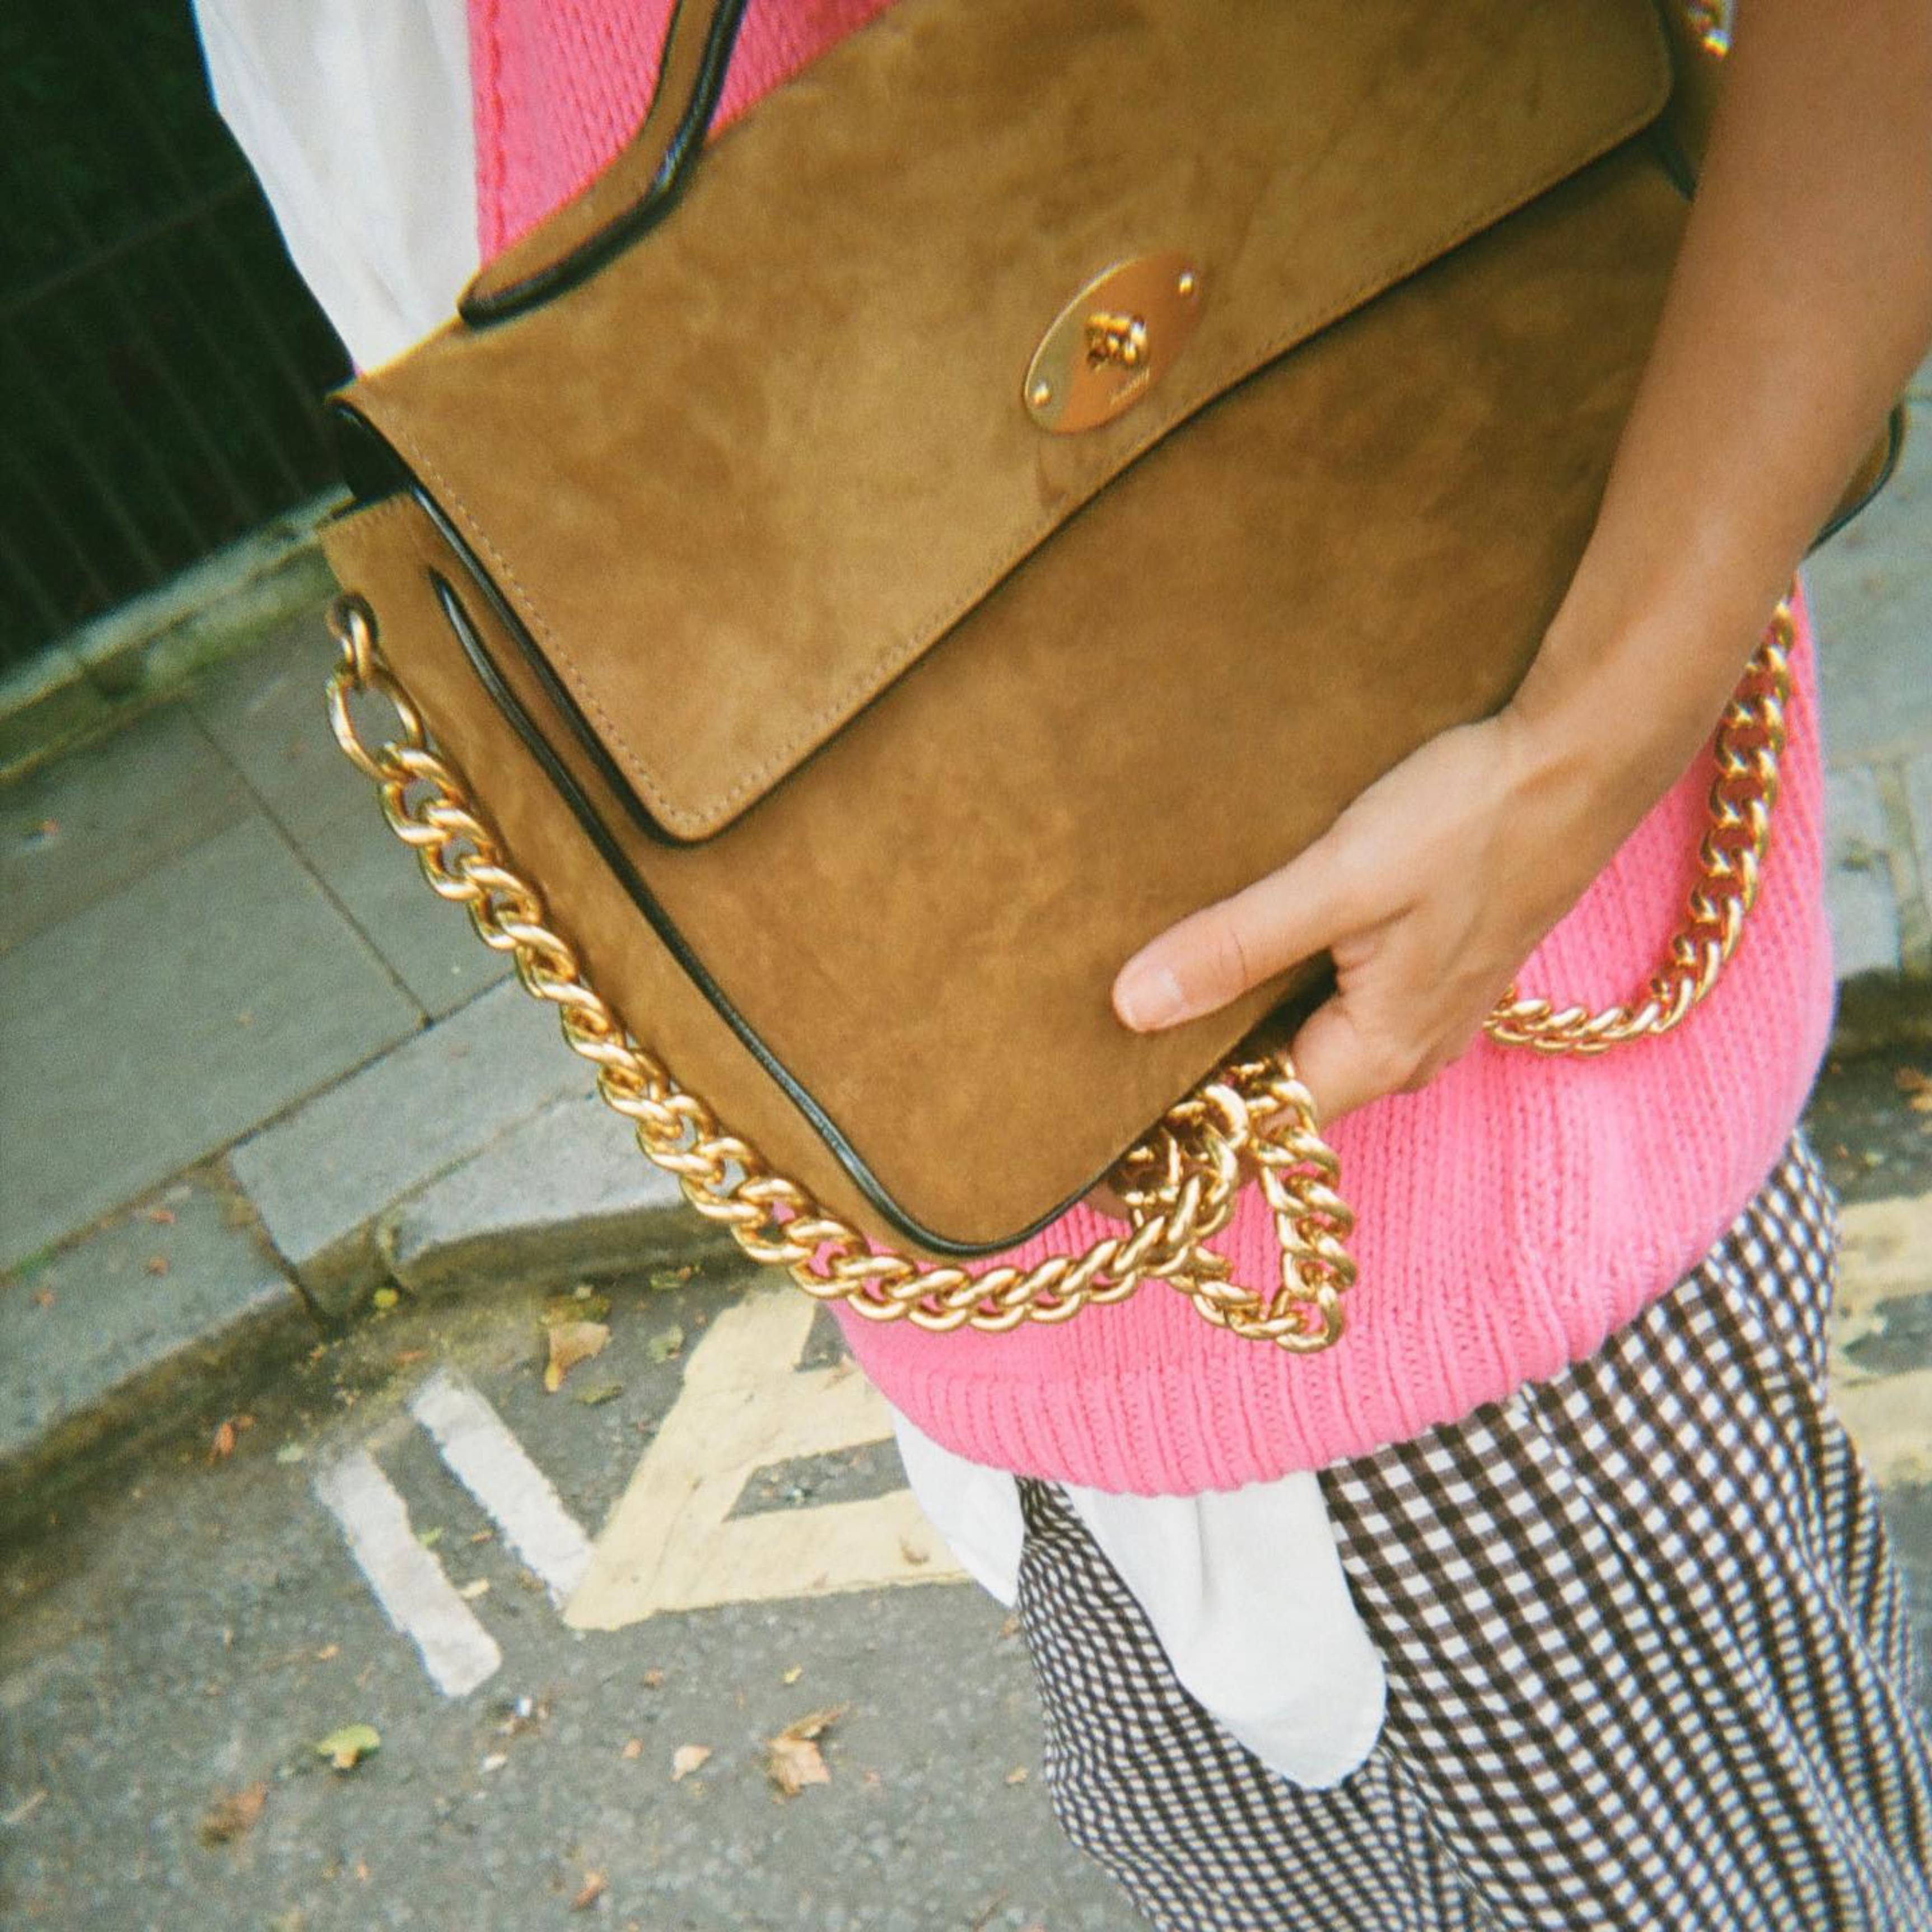 Let's Give Mulberry Another Look - PurseBlog